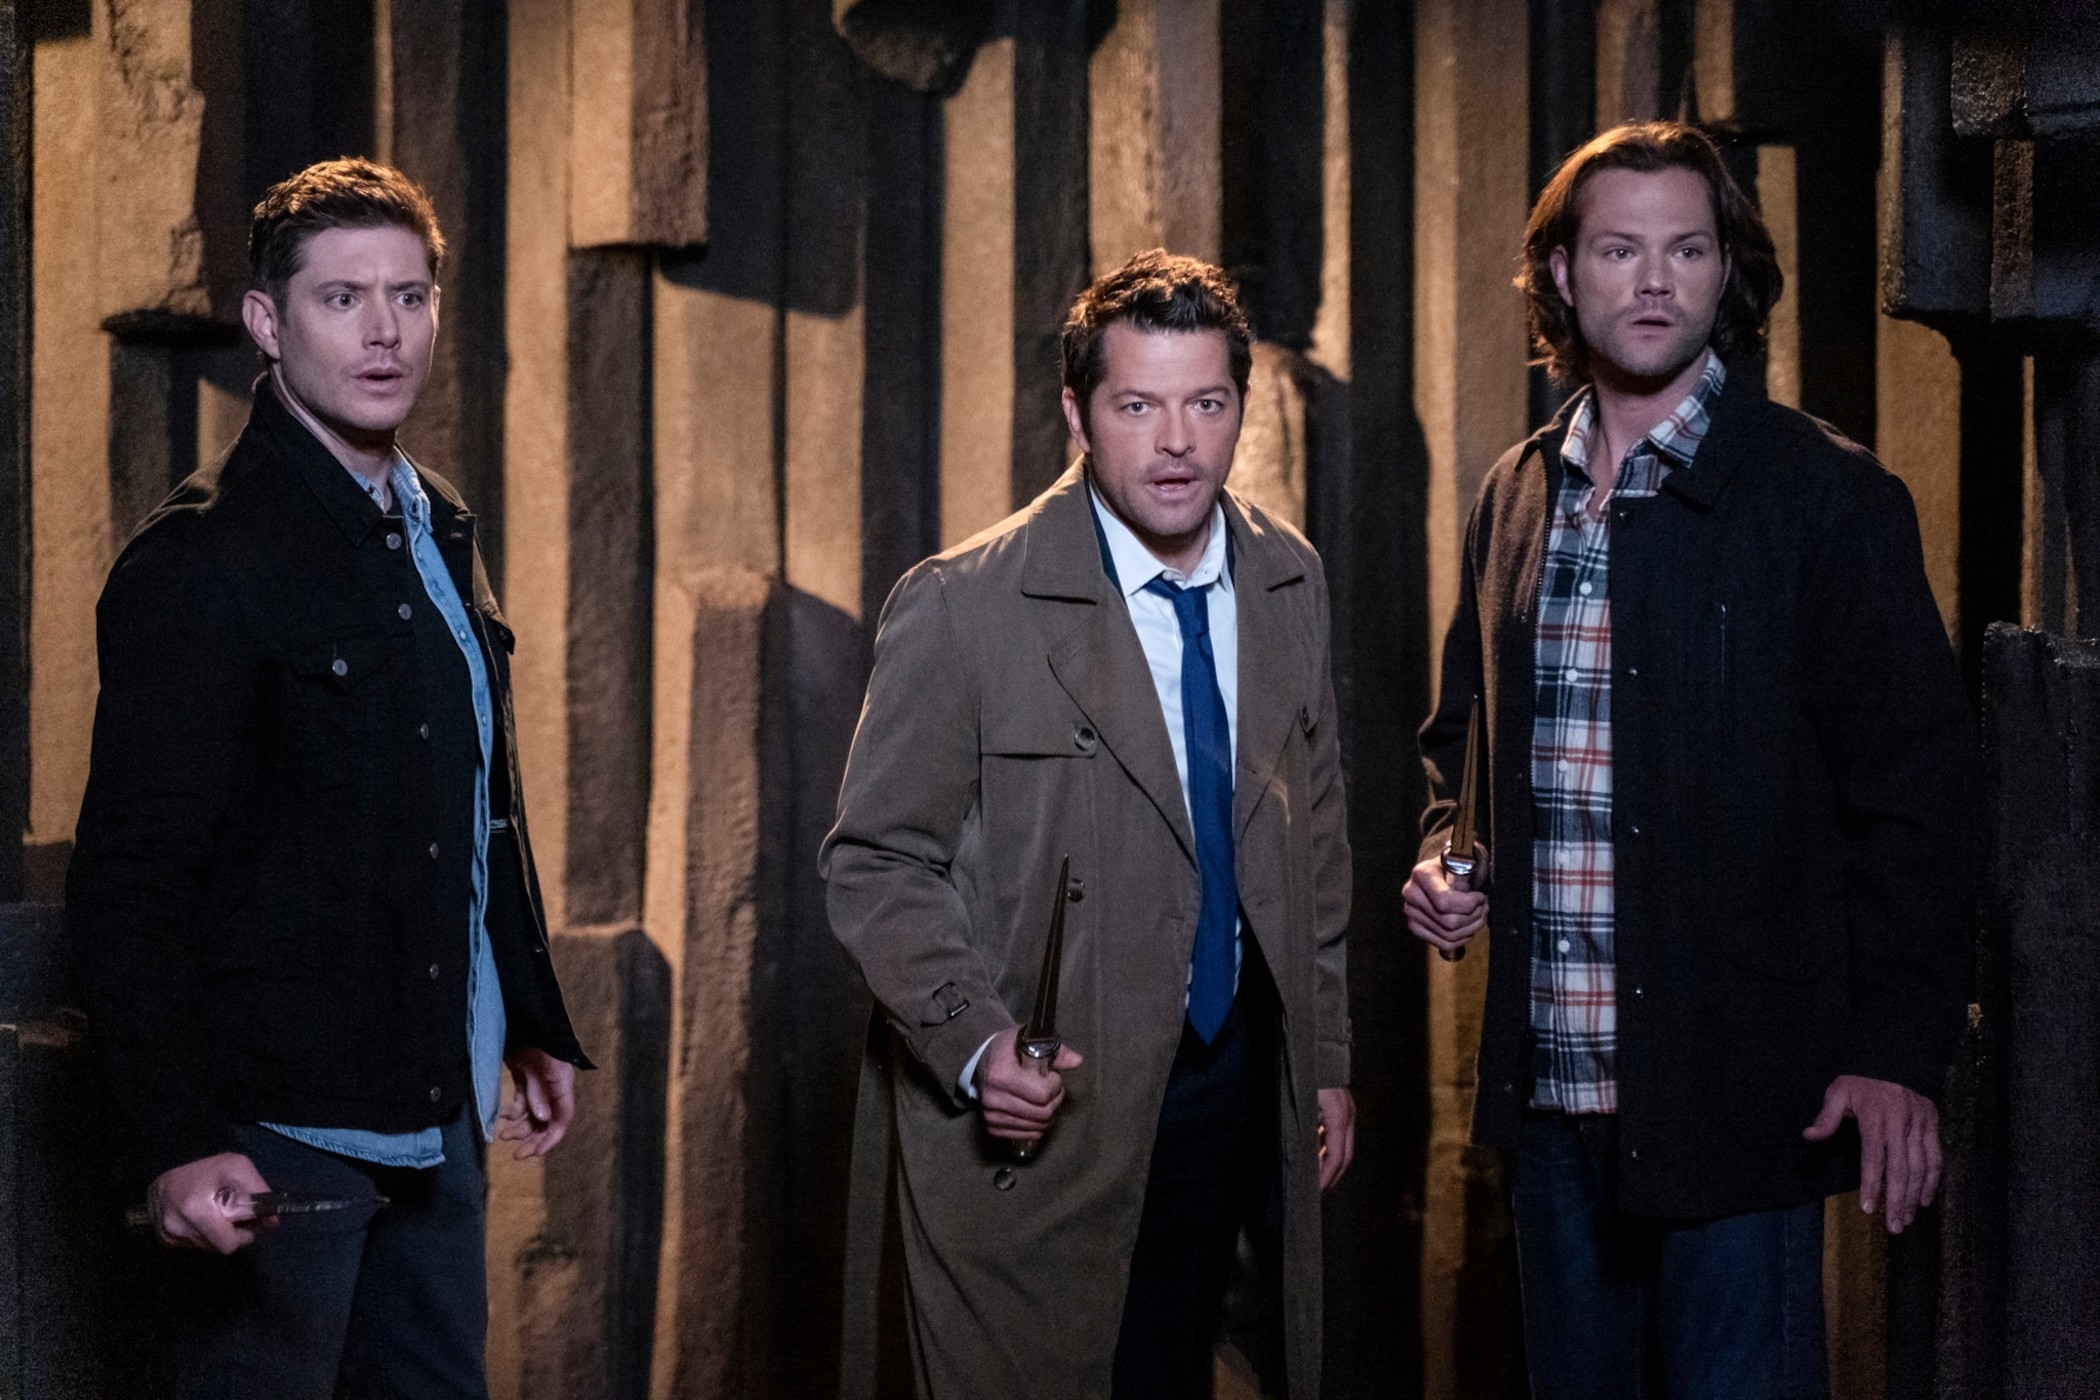 Dean, Castiel, and Sam from &quot;Supernatural&quot; in character, standing alert in a dimly lit wooden room